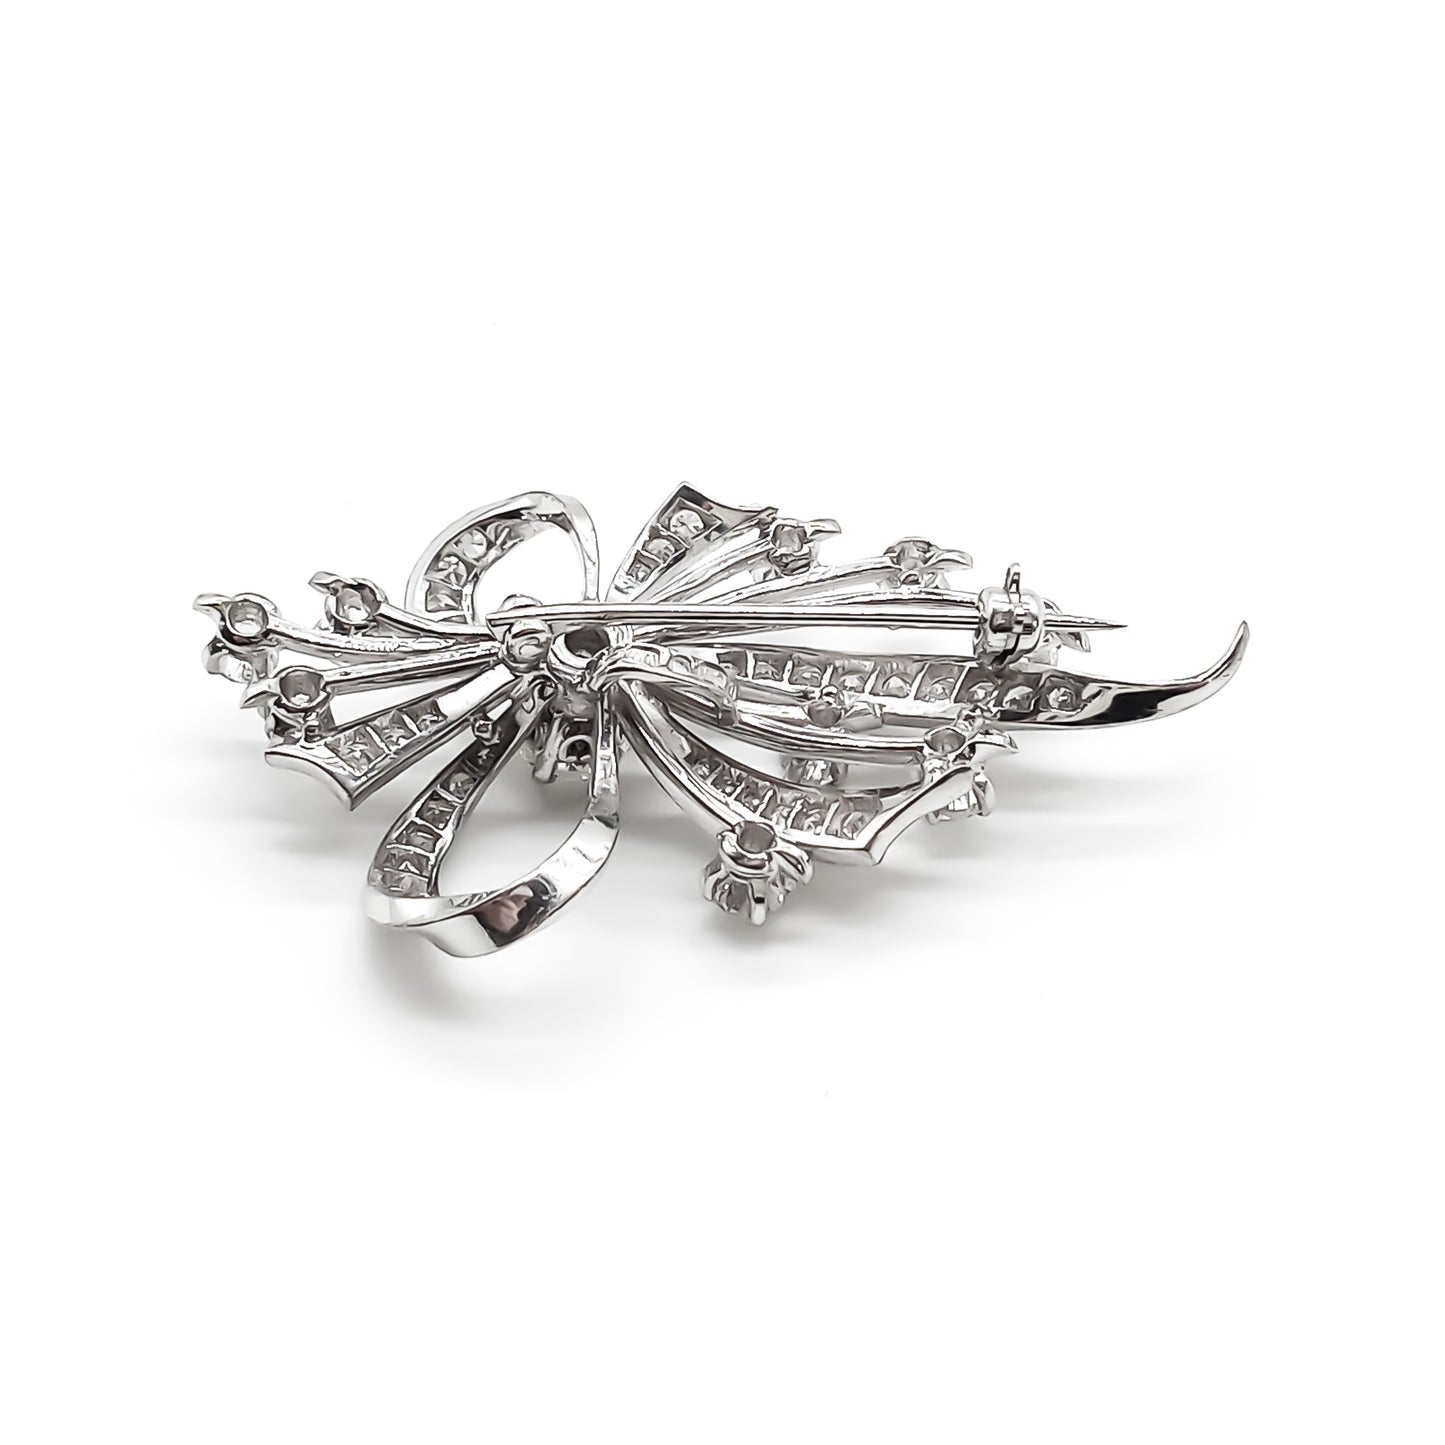 Exquisite 18ct white gold diamond brooch. A real statement piece! Circa 1940’s